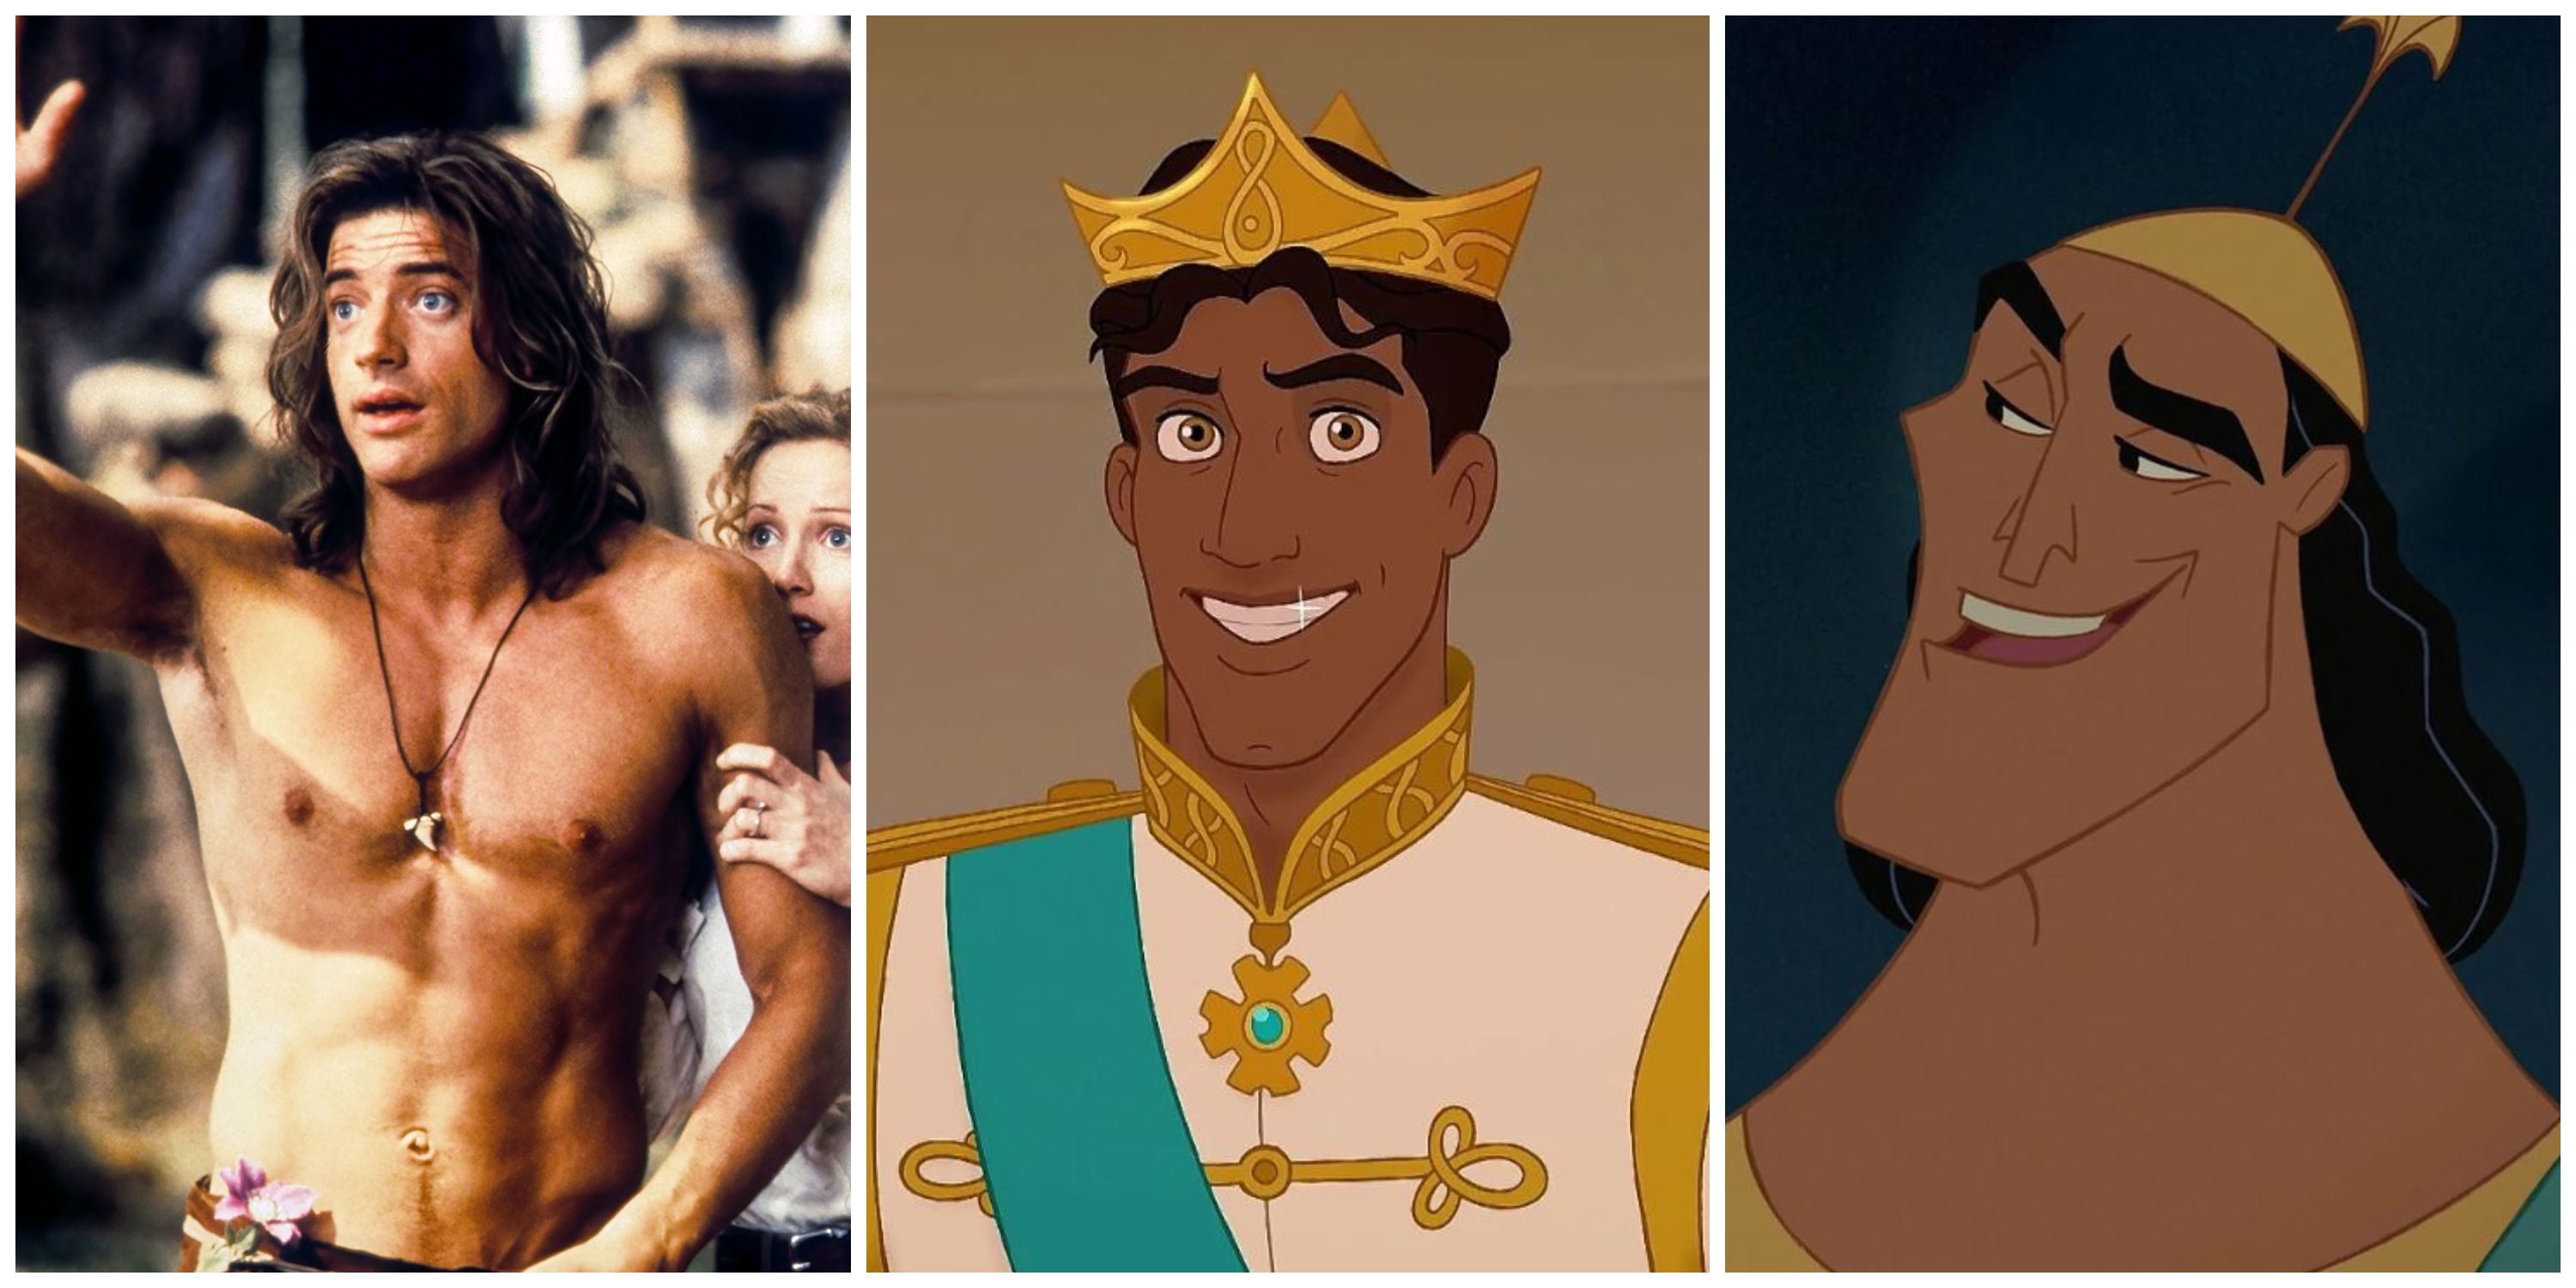 George of the Jungle, Prince Naveen from The Princess and the Frog, Kronk from The Emperor's New Groove split image.